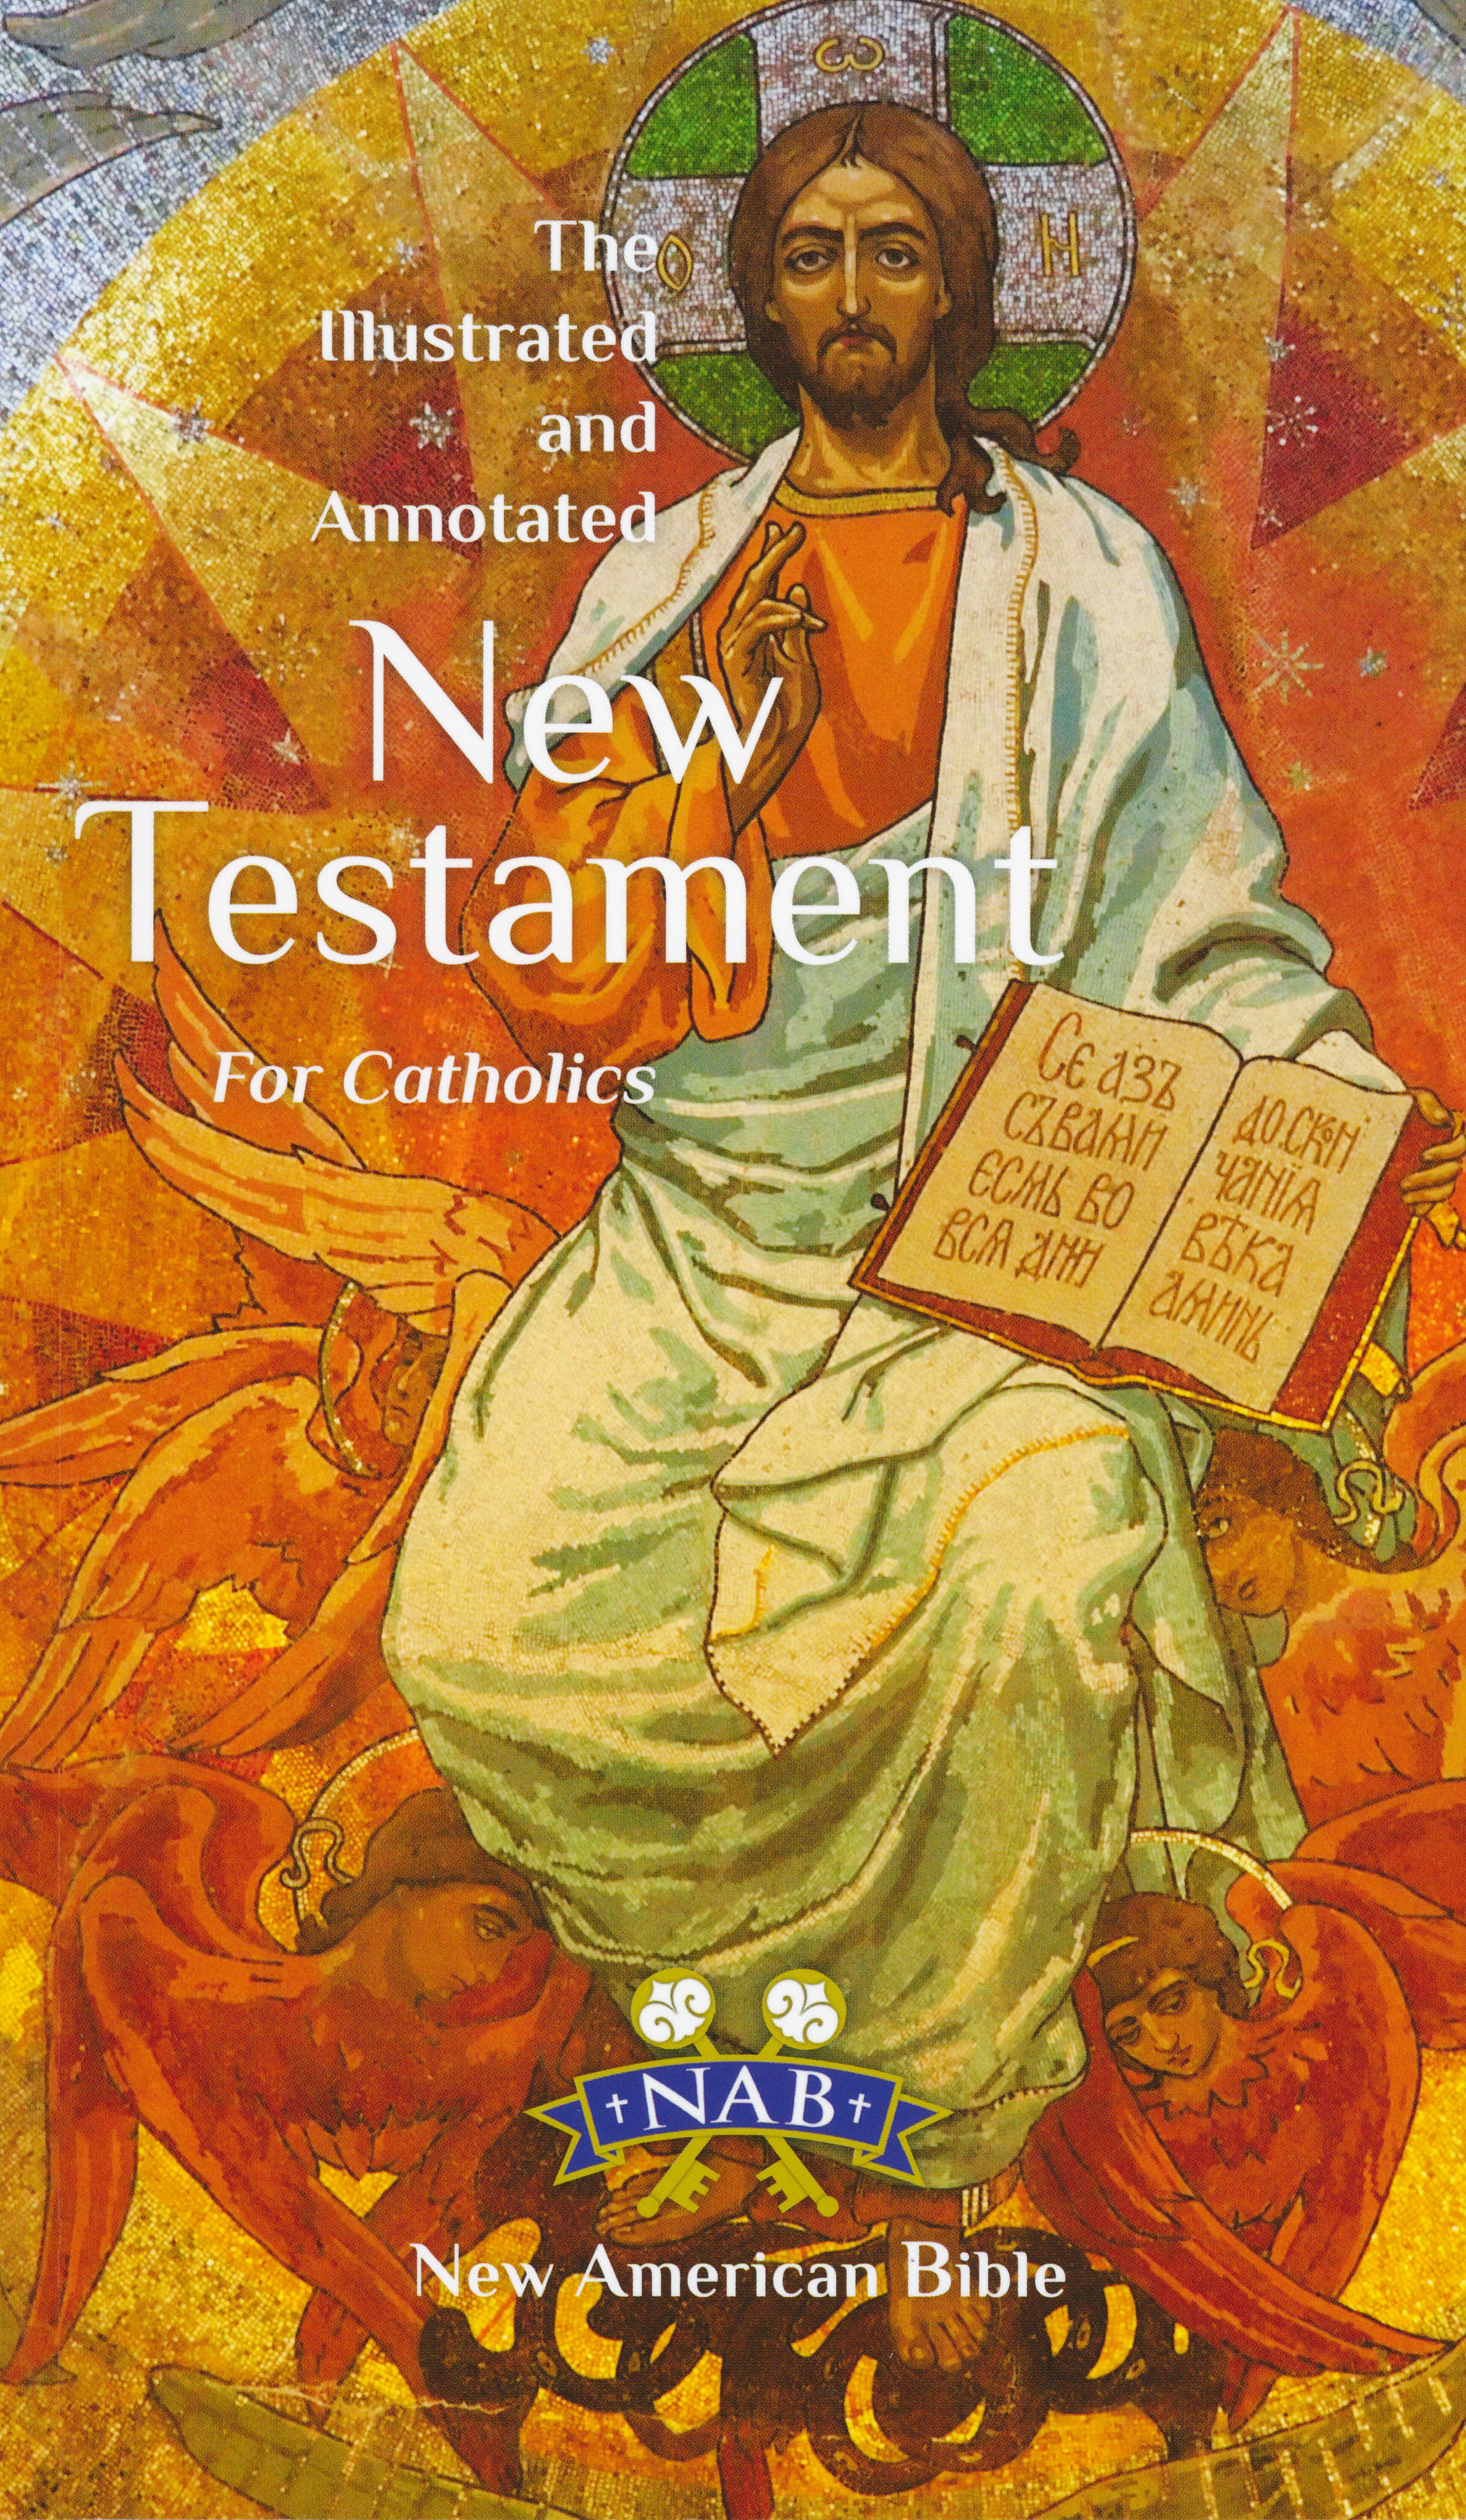 The Illustrated and Annotated New Testament for Catholics from Liturgical Training Publications 120-9781616712587